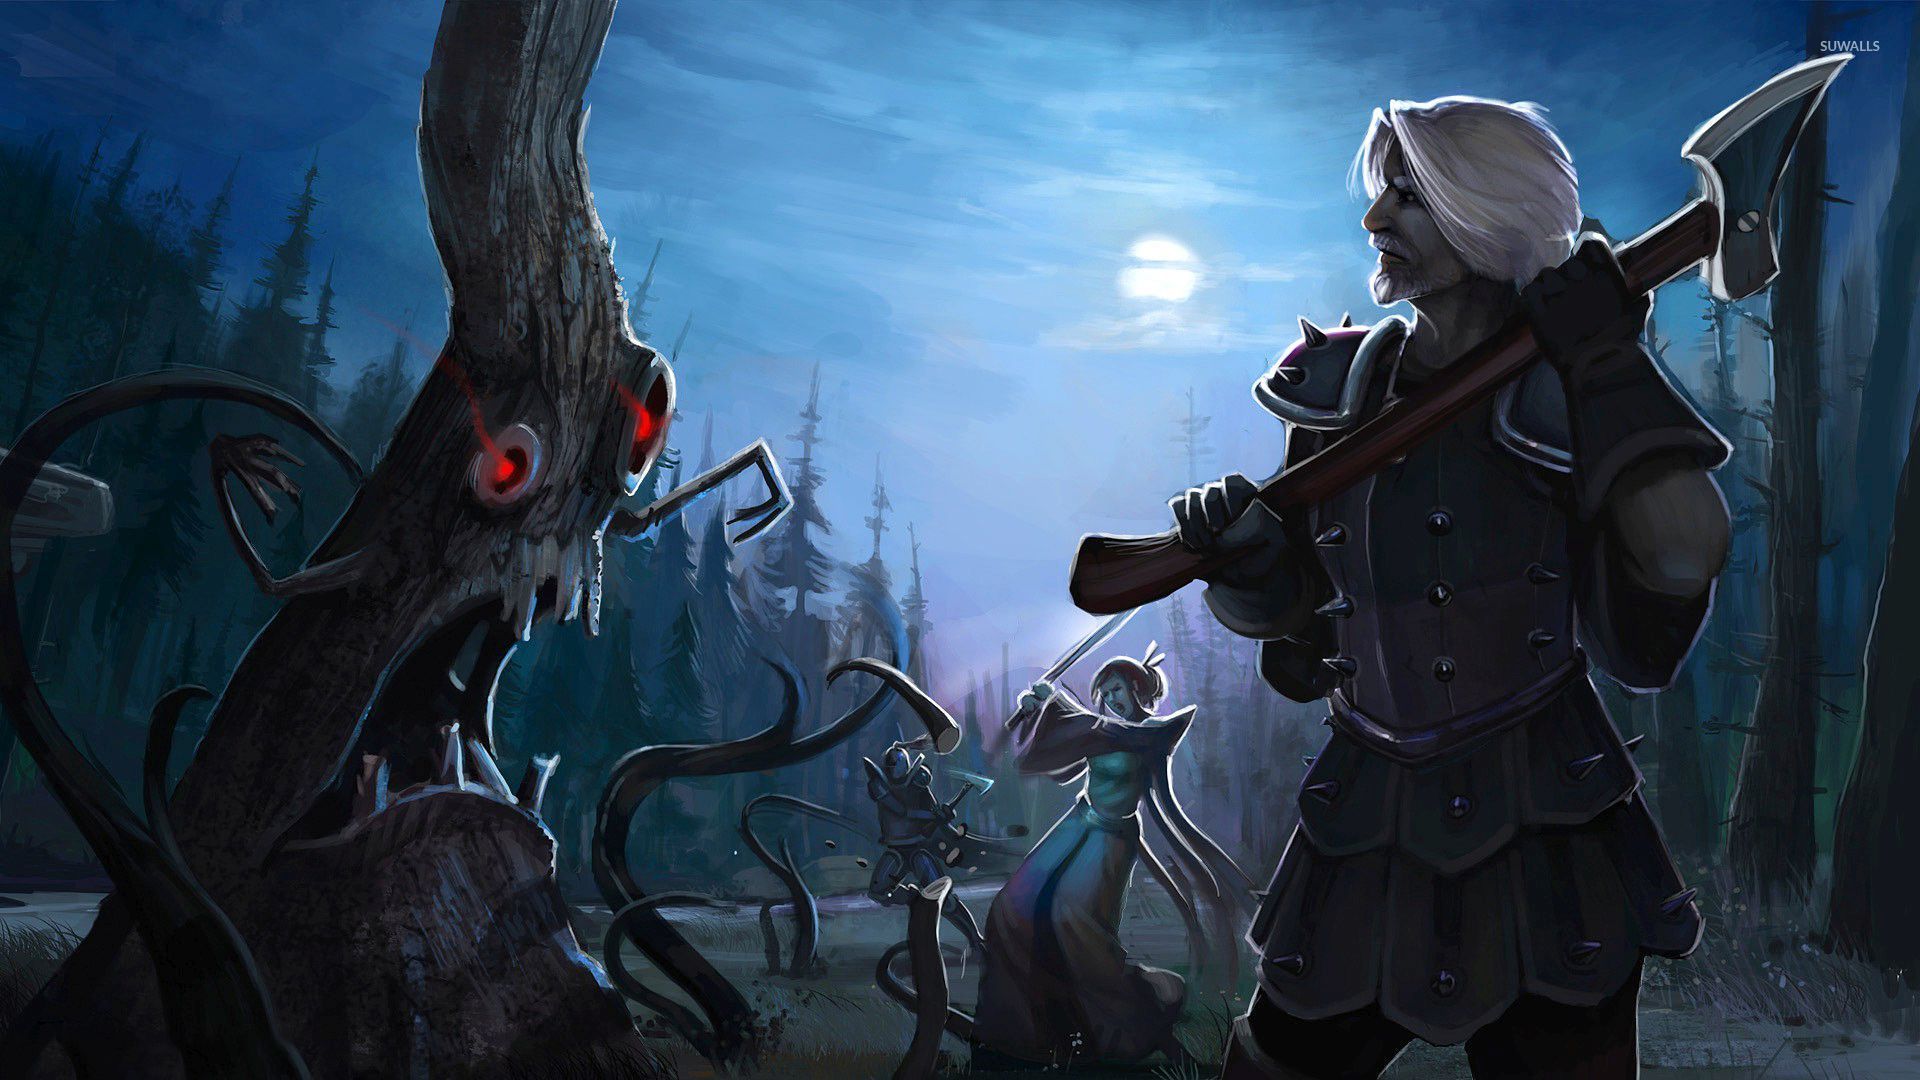 Cool Runescape Wallpapers